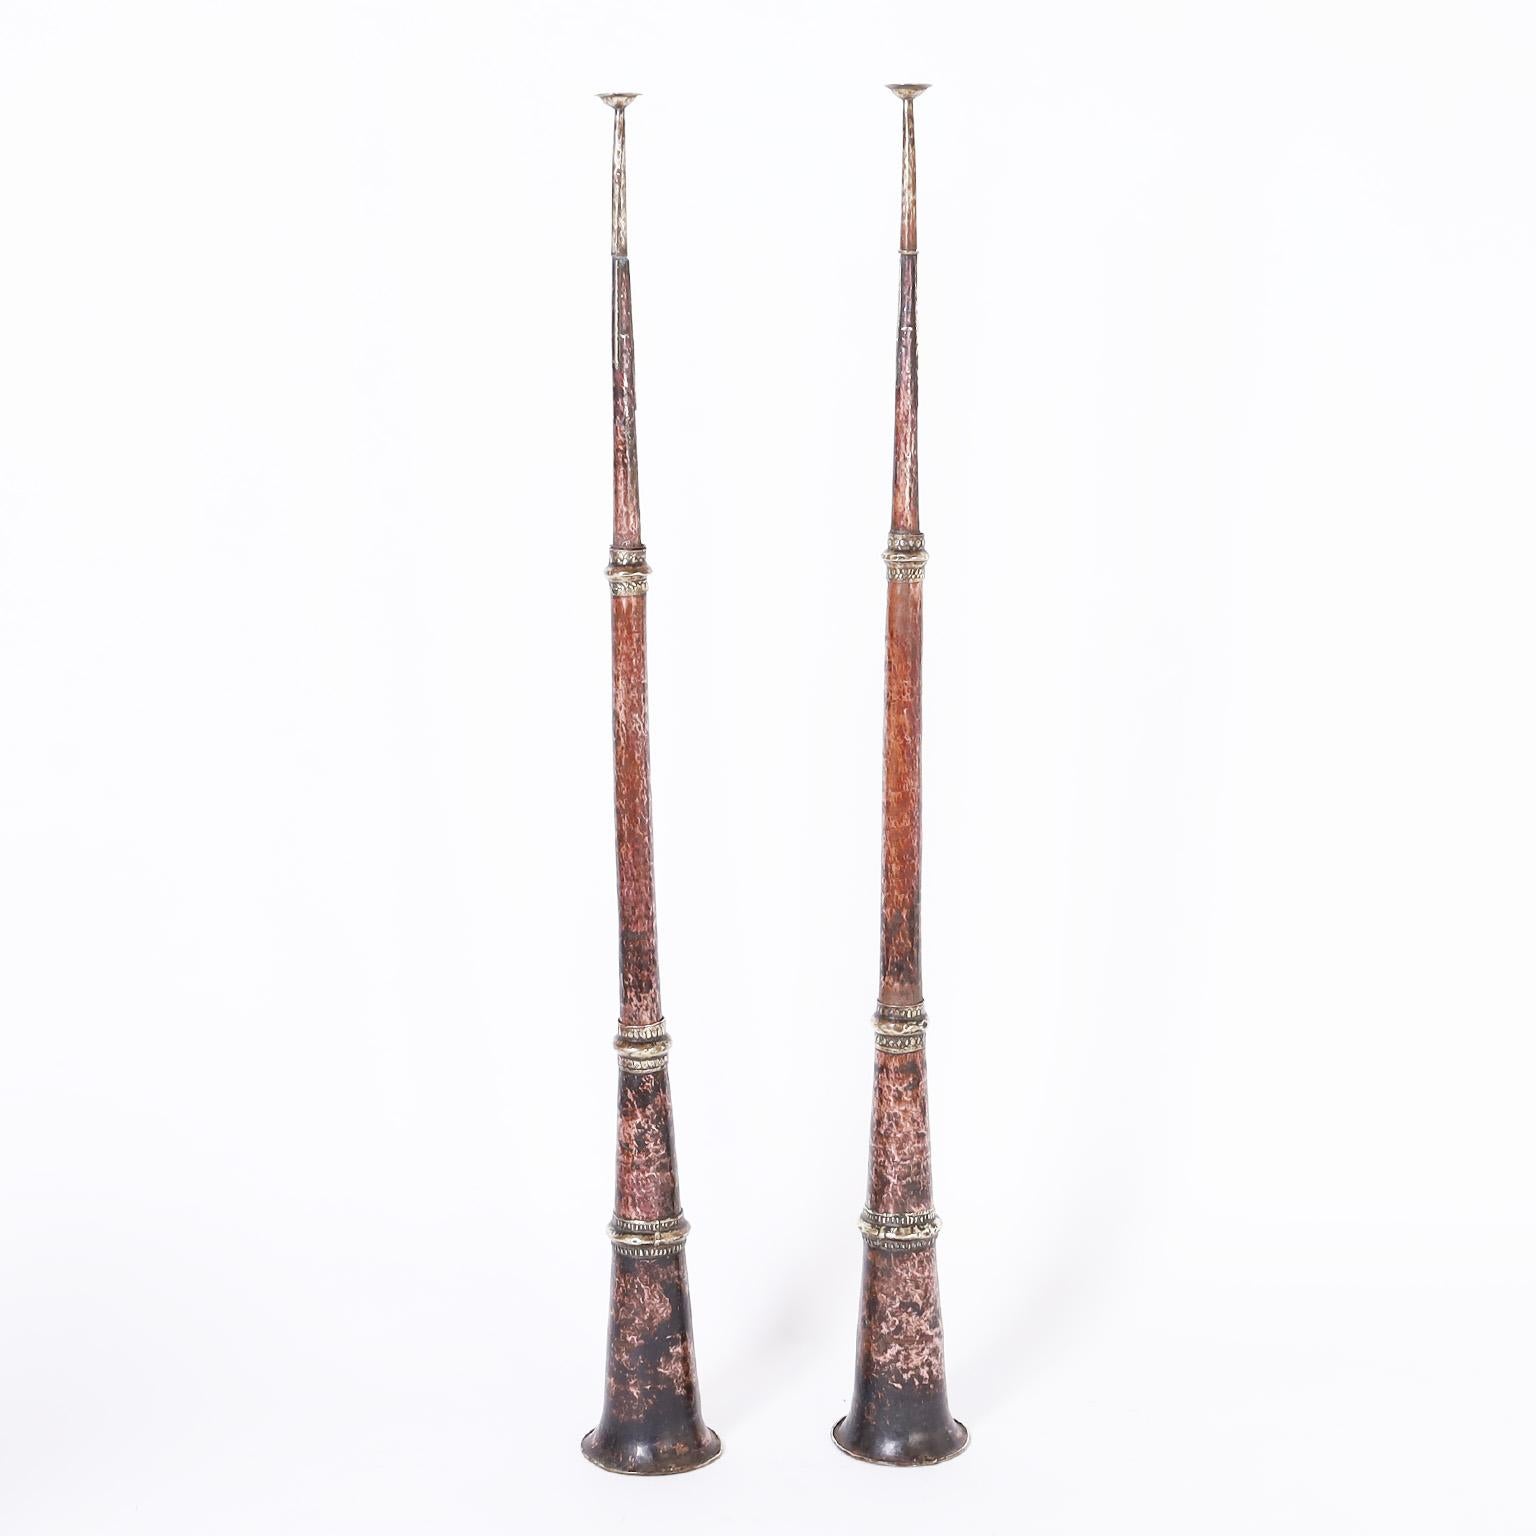 British Colonial Pair of Tibetan Telescopic Horns or Dungchens